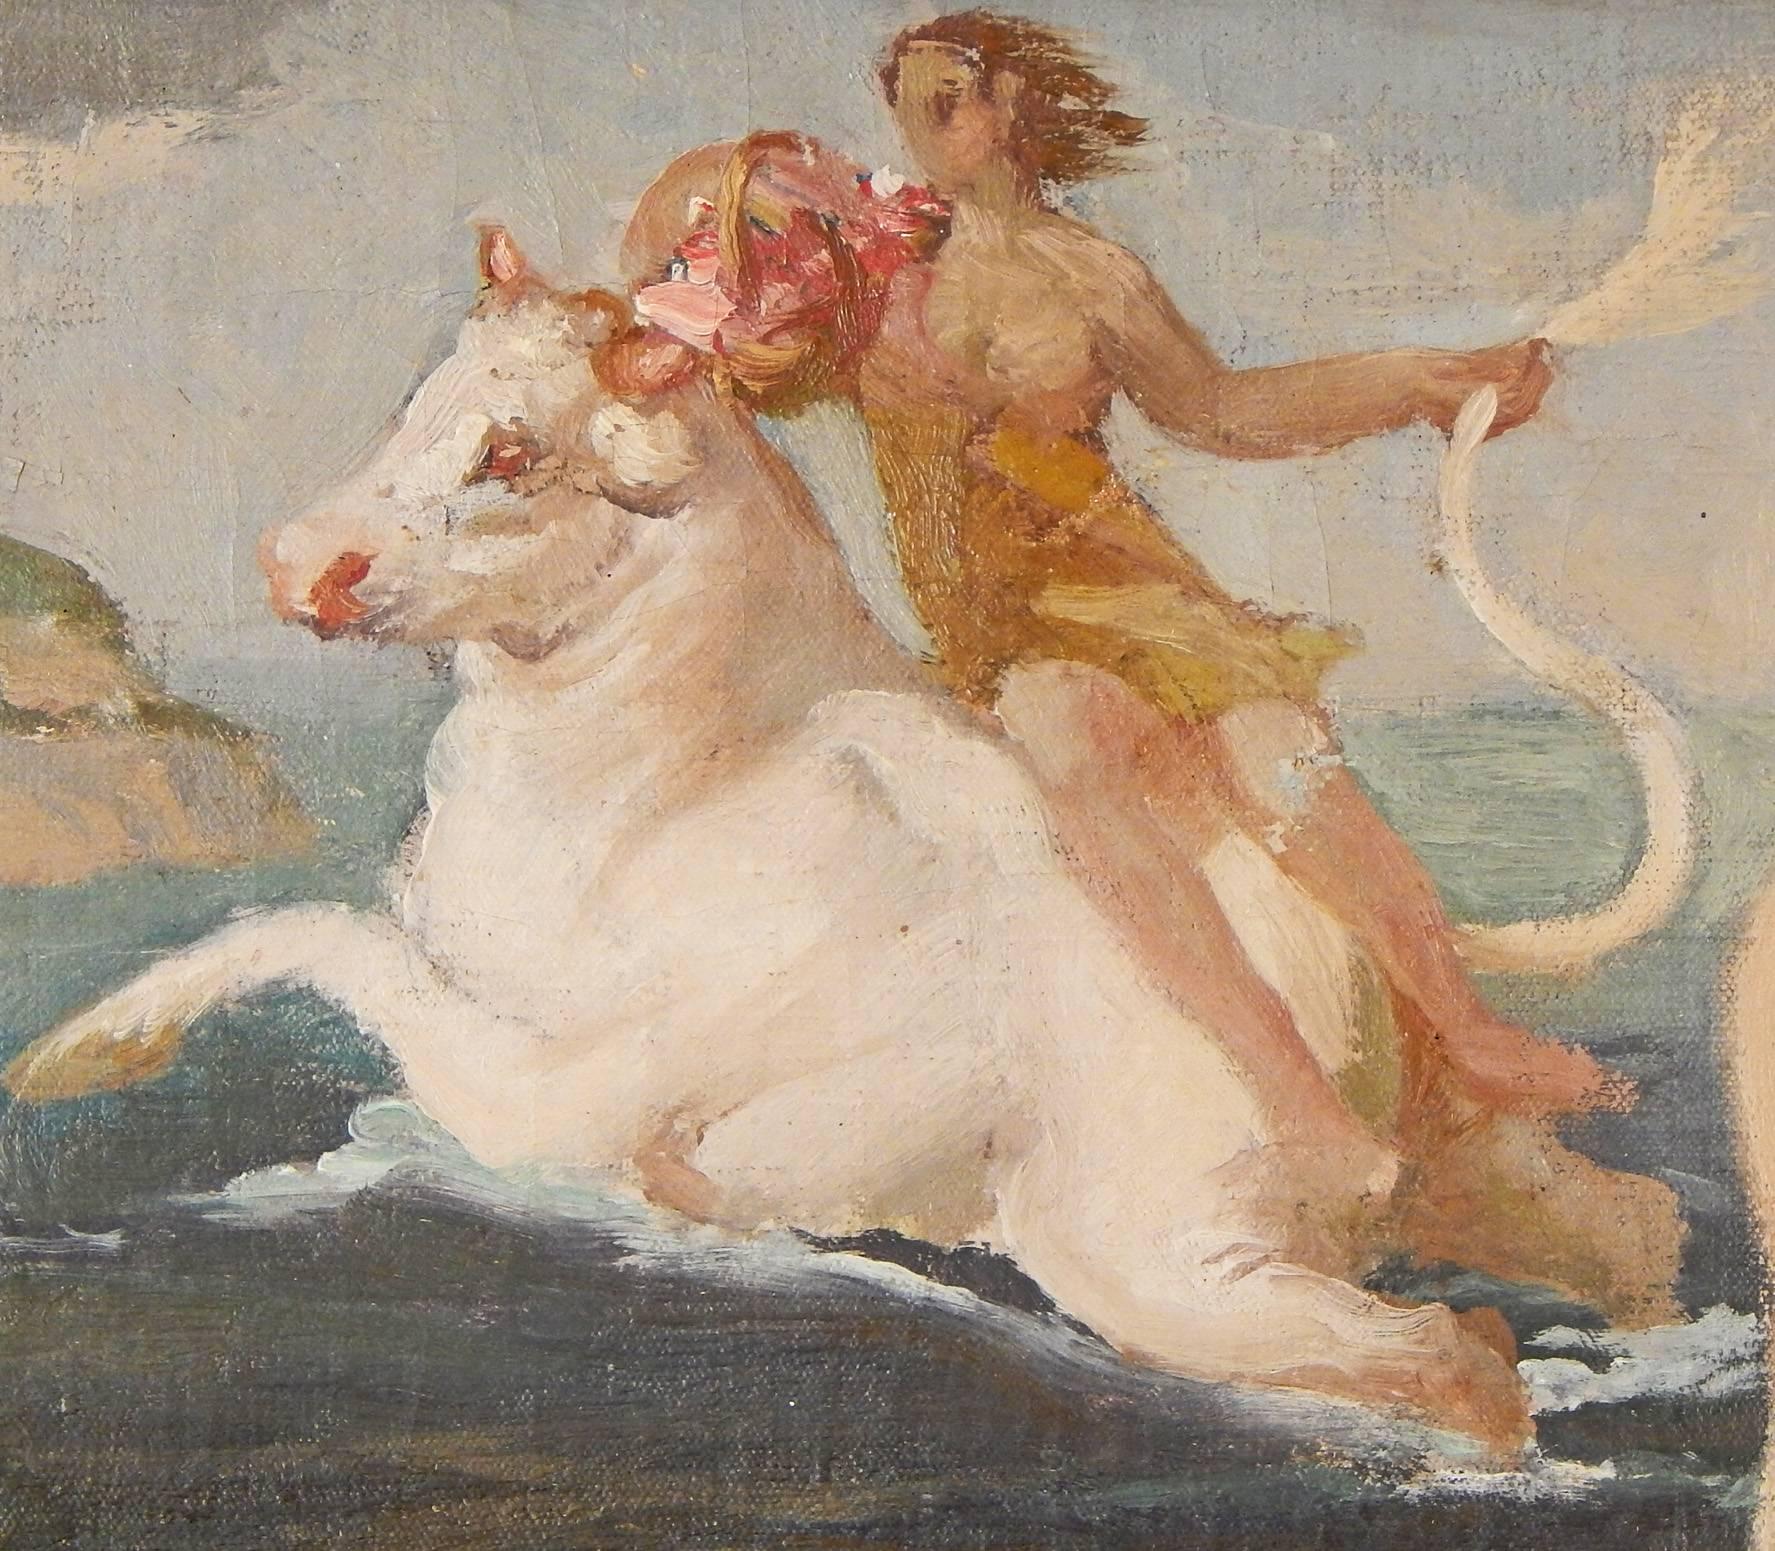 An especially lovely and fresh take on the Classic Europa and the Bull myth that so intrigued artists in the Art Deco era, this impressionistic study by Ezio Giovannozzi was probably painted in preparation for a major mural in Italy. The artist is